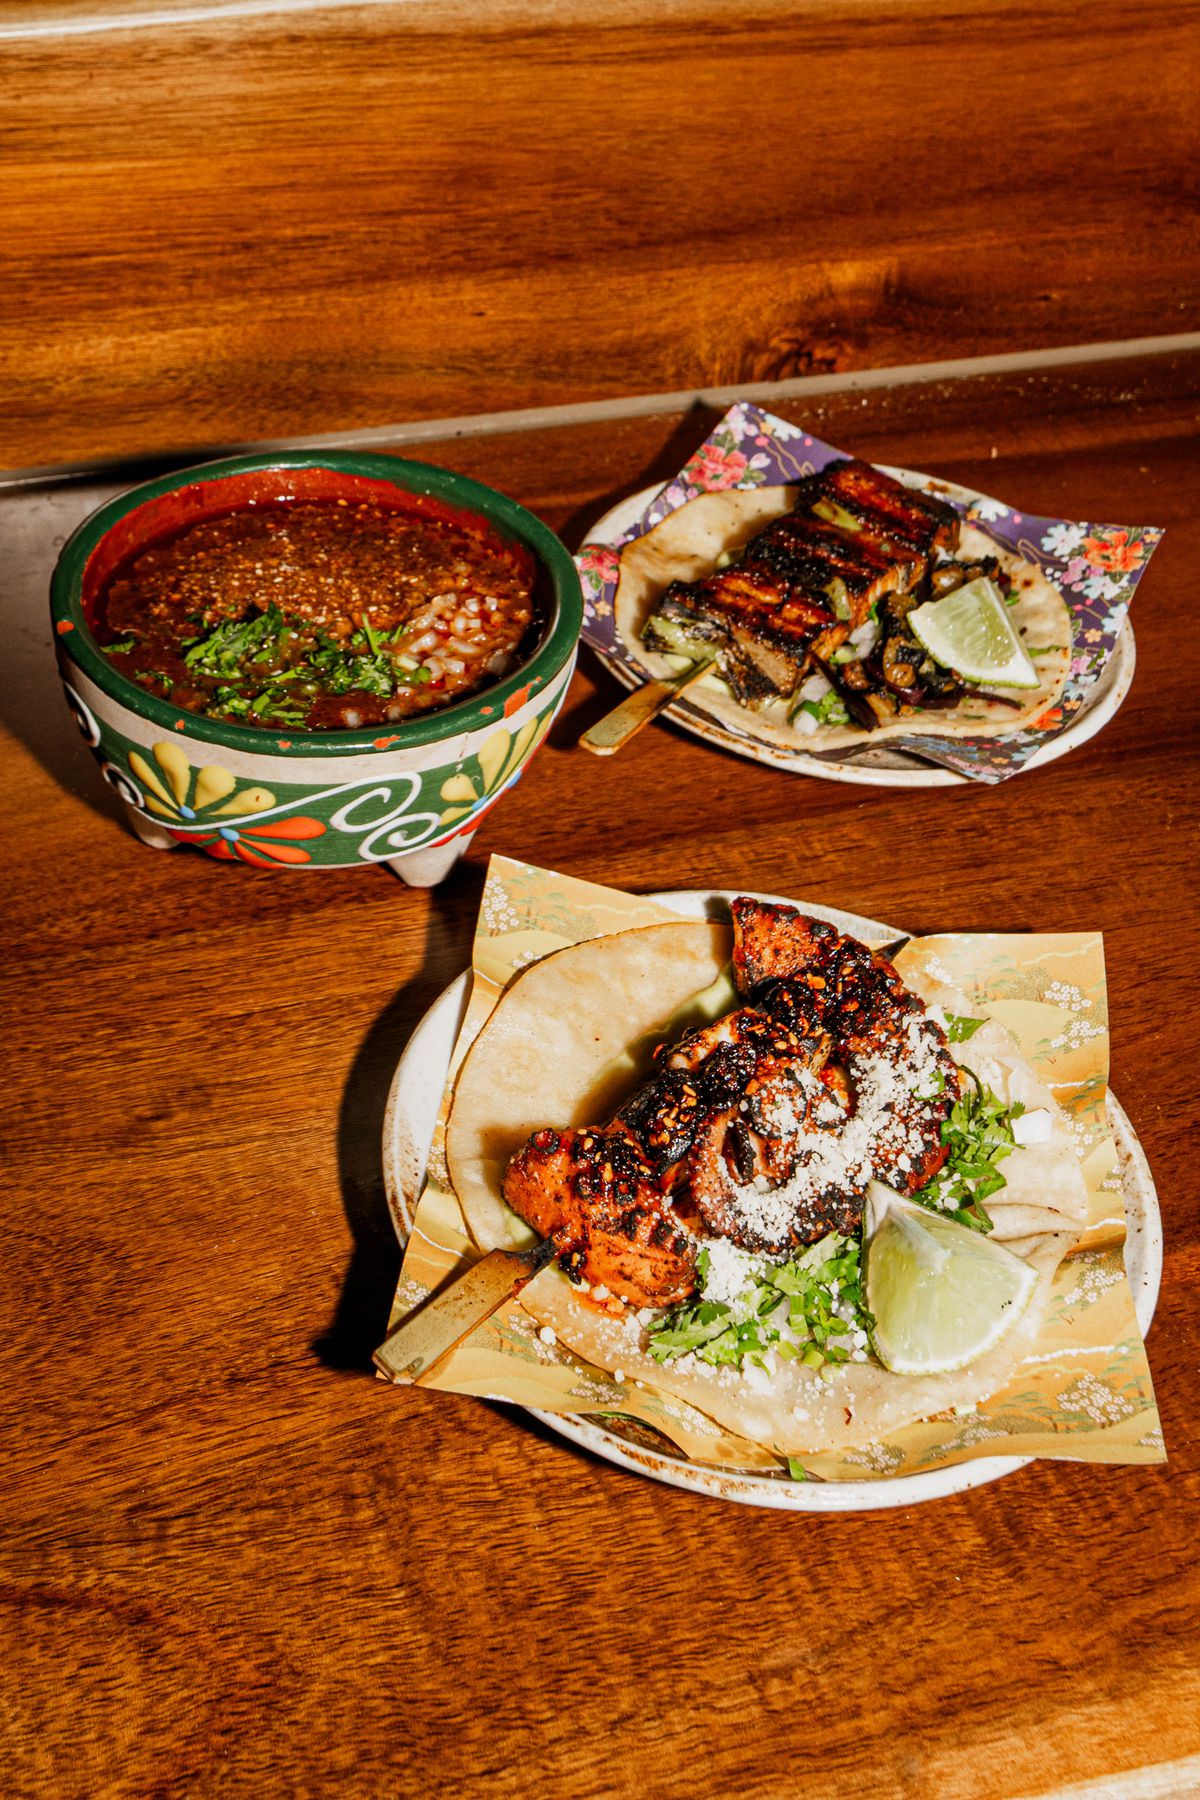 A bowl of broth next to two plates of tacos with skewered meats.